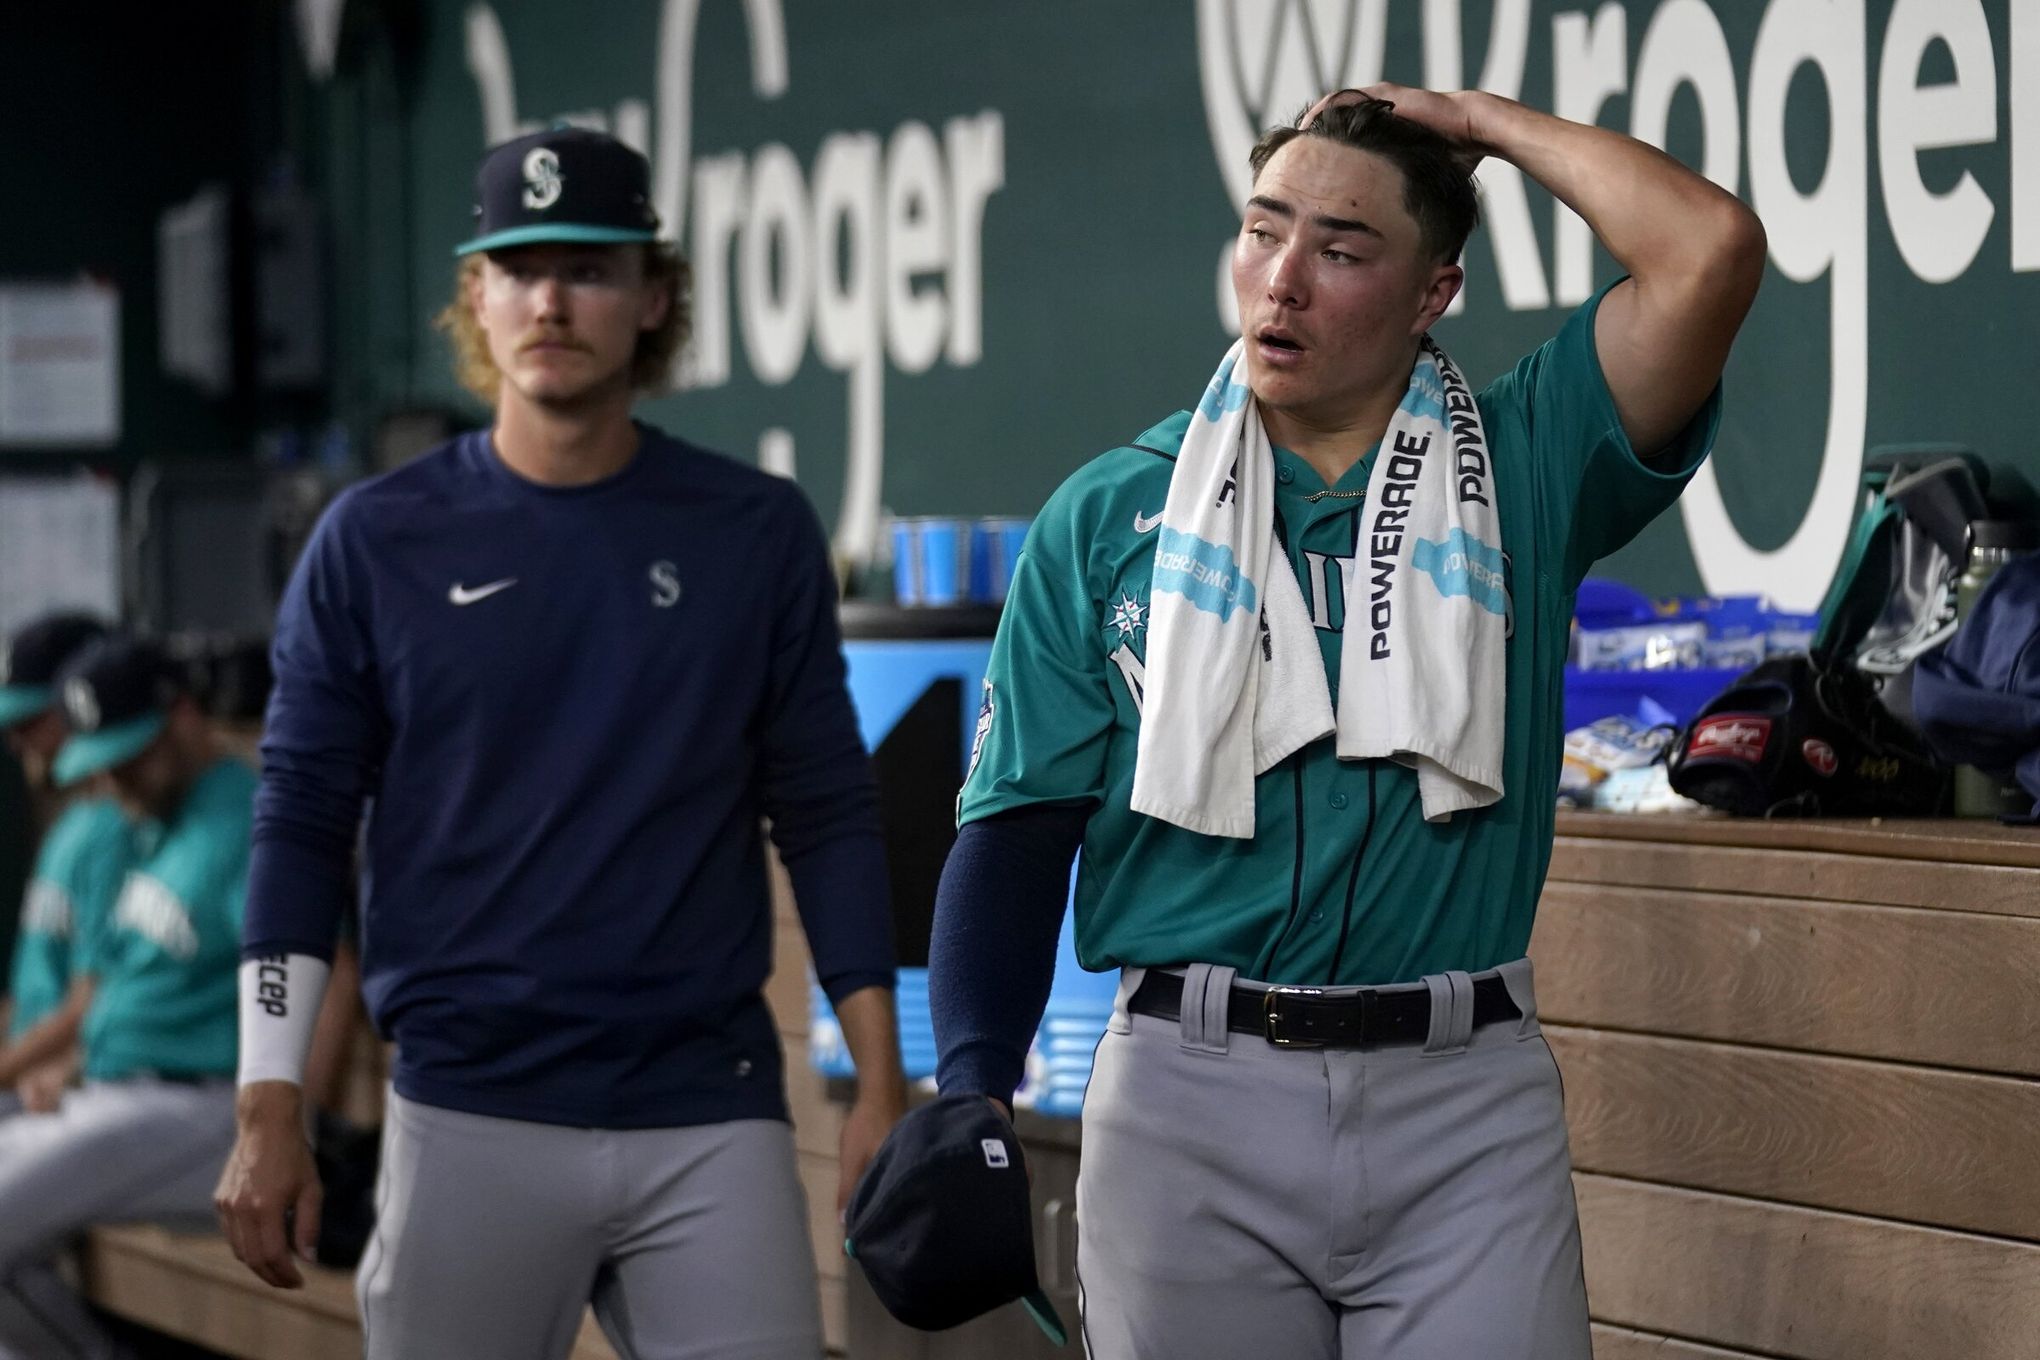 A Seattle Mariners player pulled off the worst MLB debut ever 